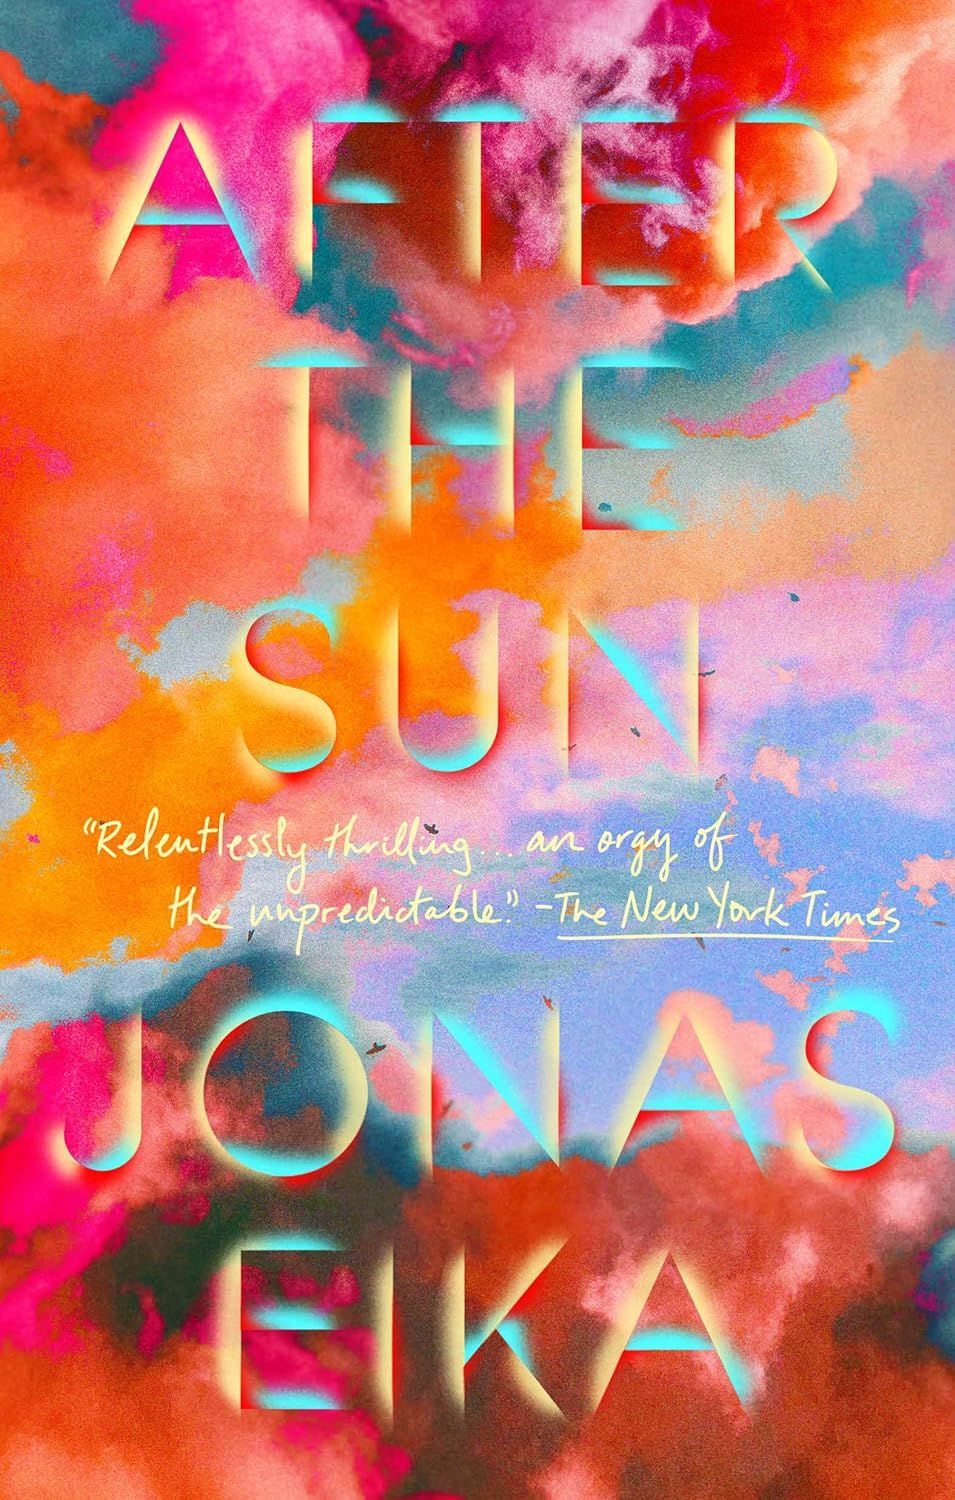 Speculative Finance and Predatory Abstraction: On Jonas Eika’s “After the Sun”